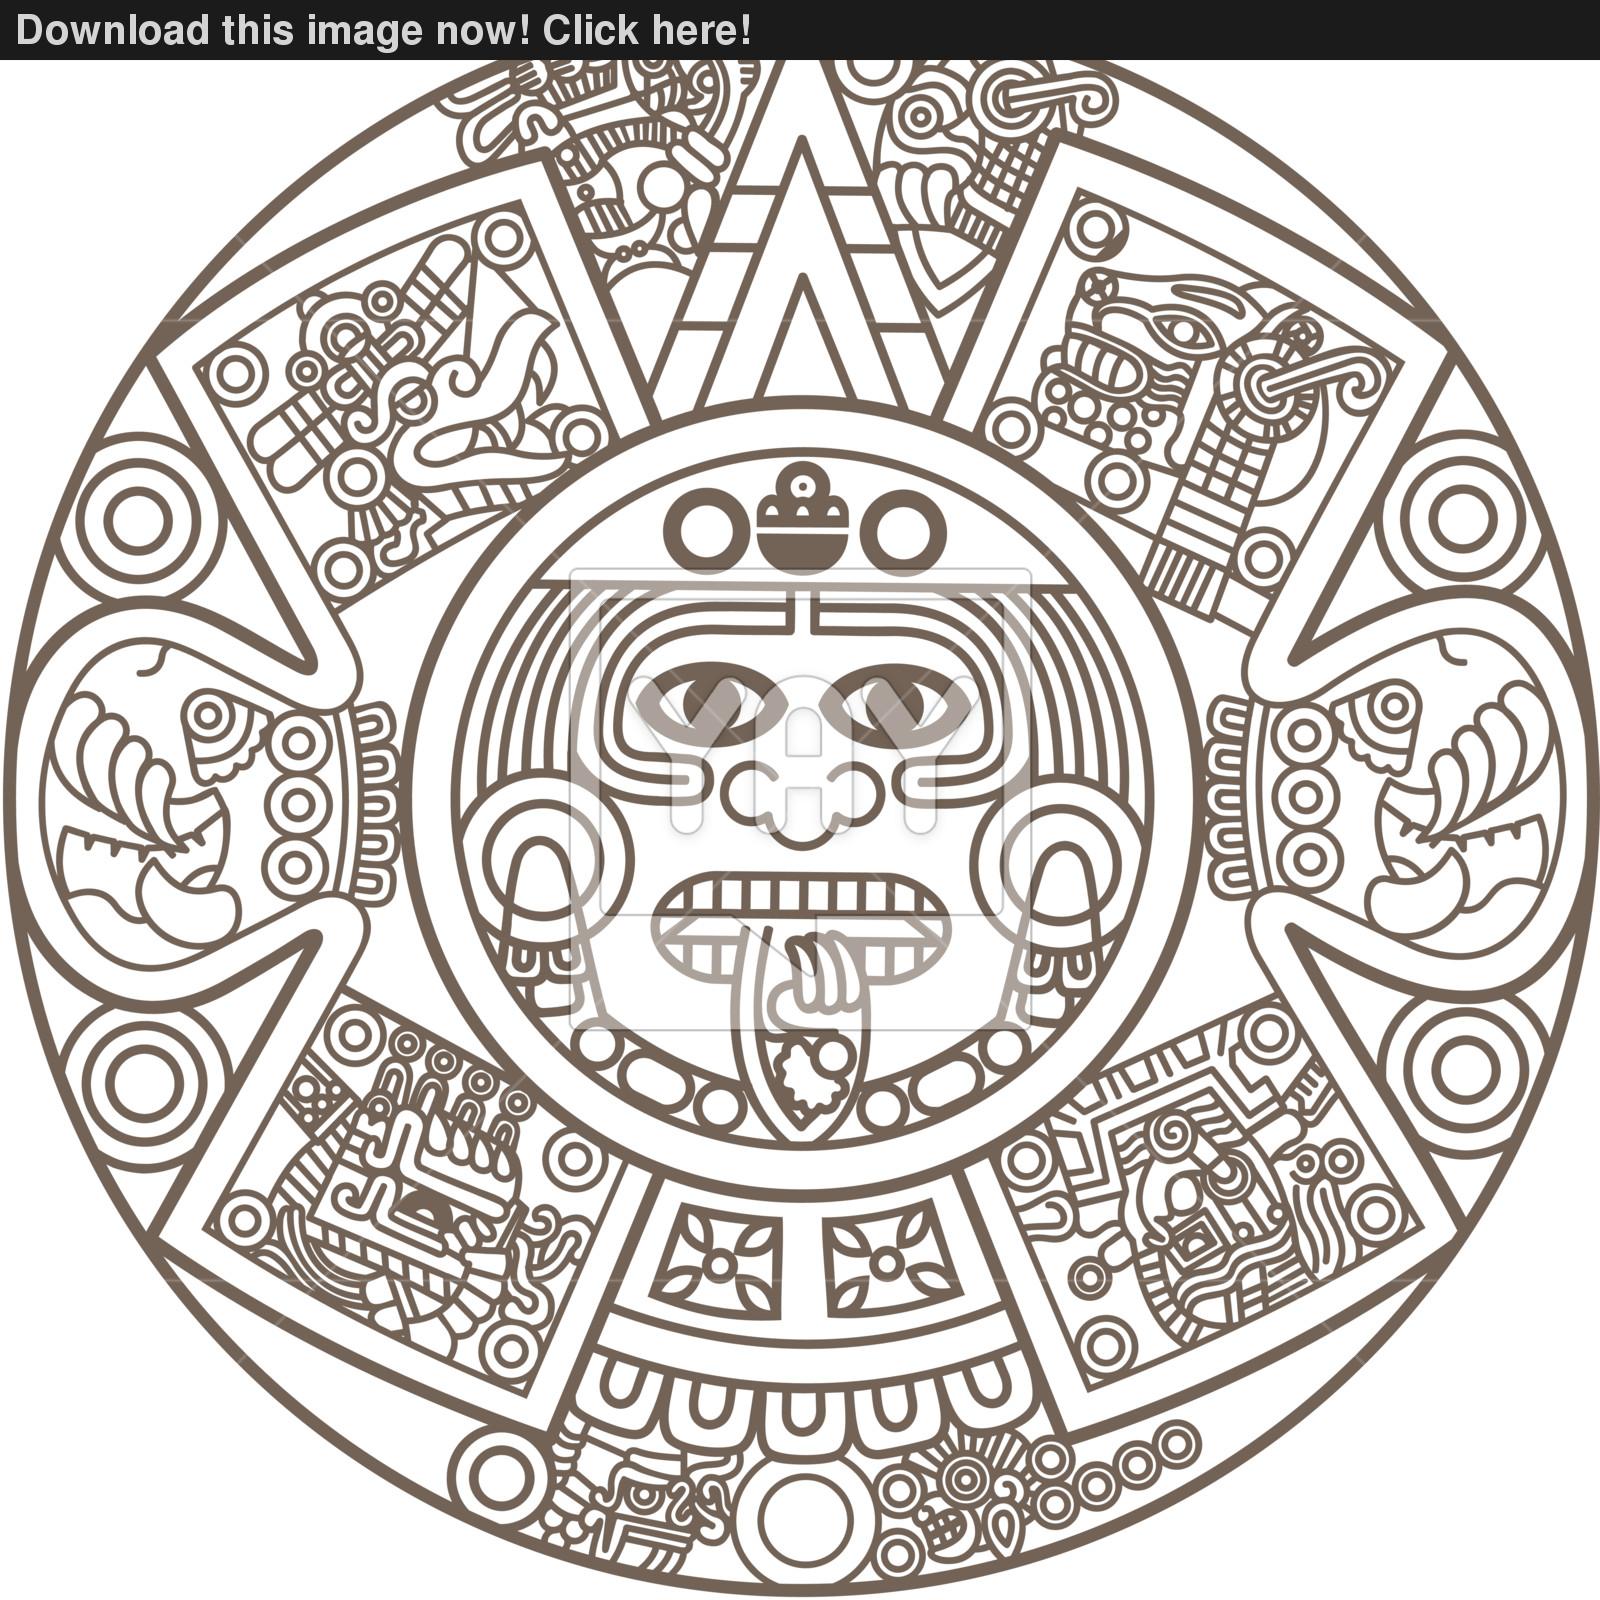 Aztec Calendar Drawing at Free for personal use Aztec